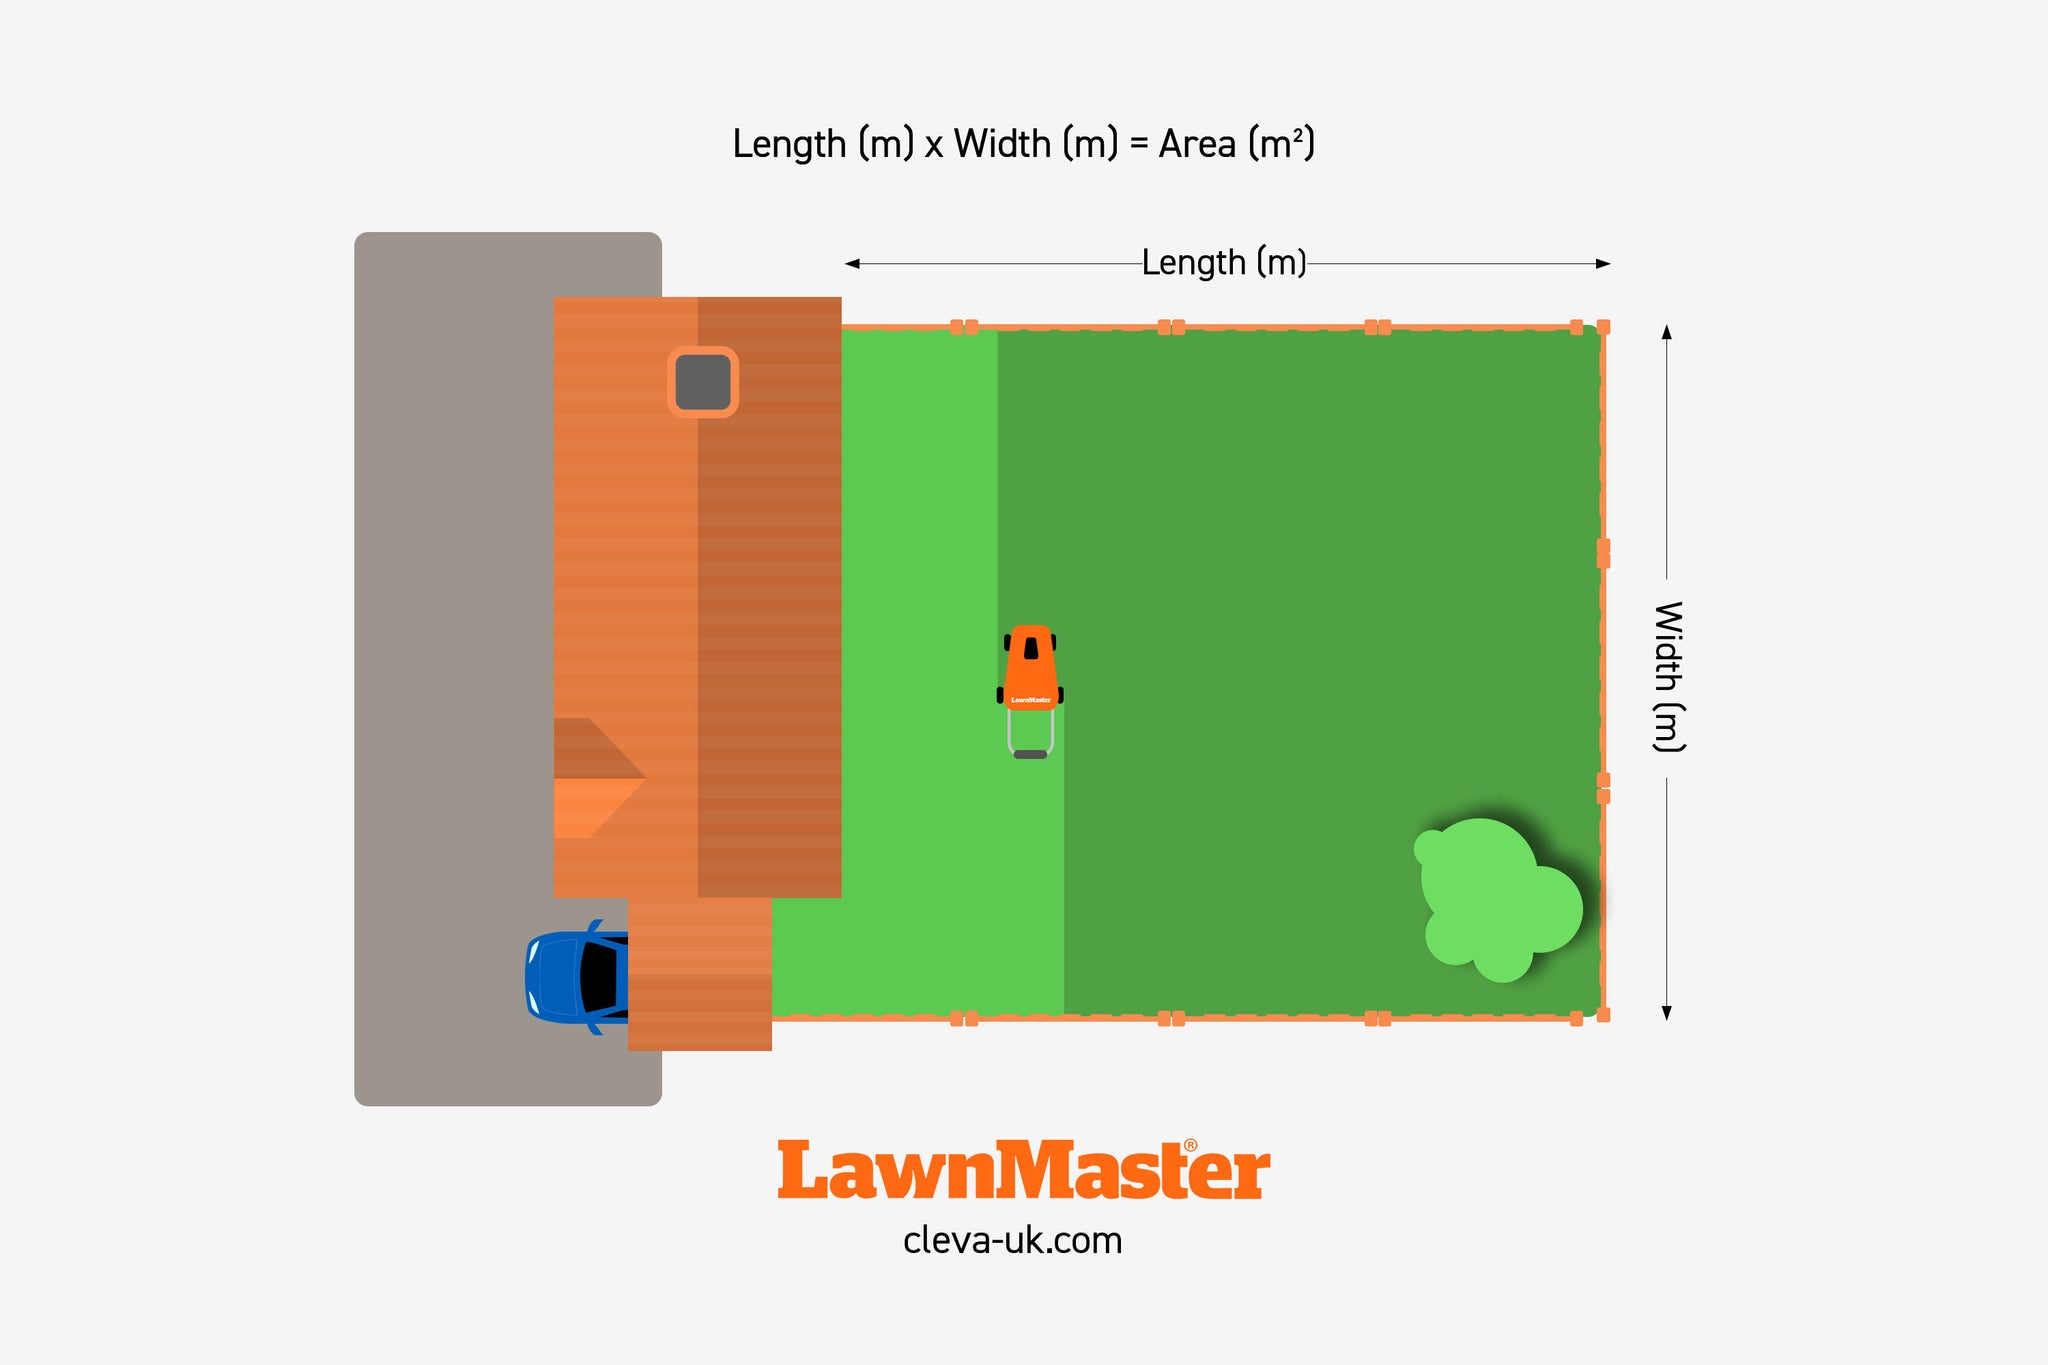 How to measure the area of a lawn